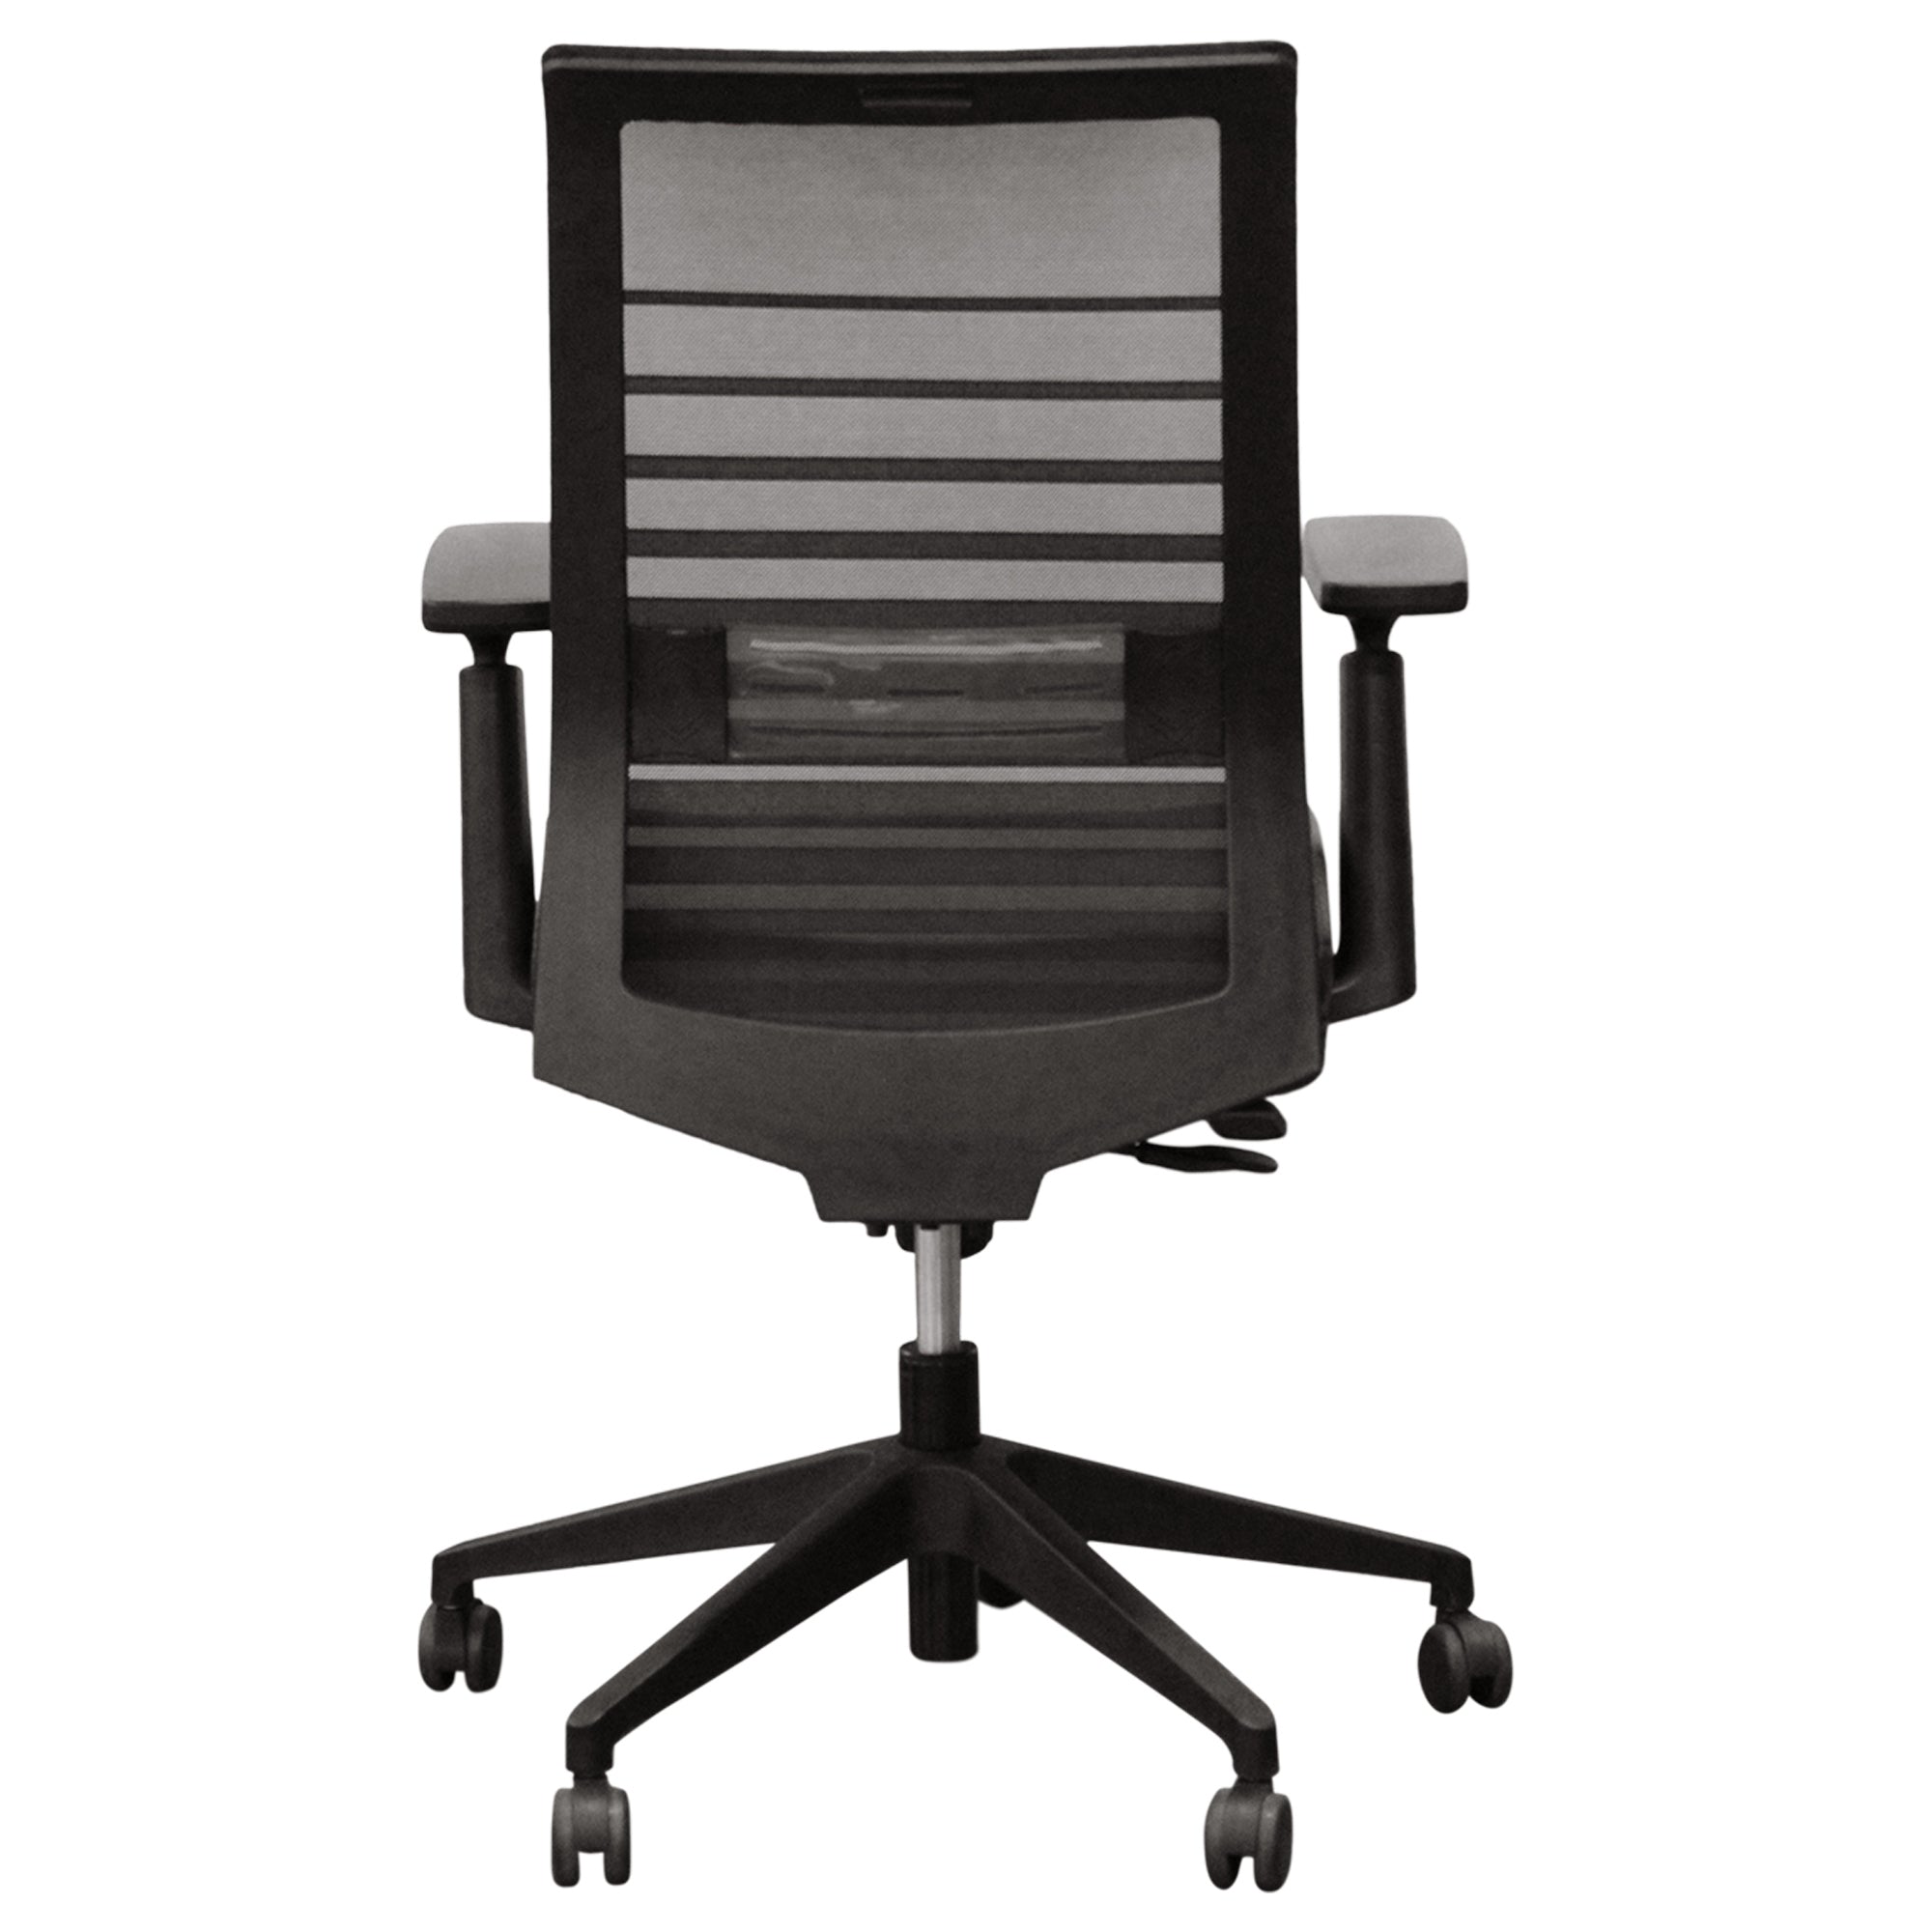 Compel Lucky Task Chair, Black Leather - New CLOSEOUT